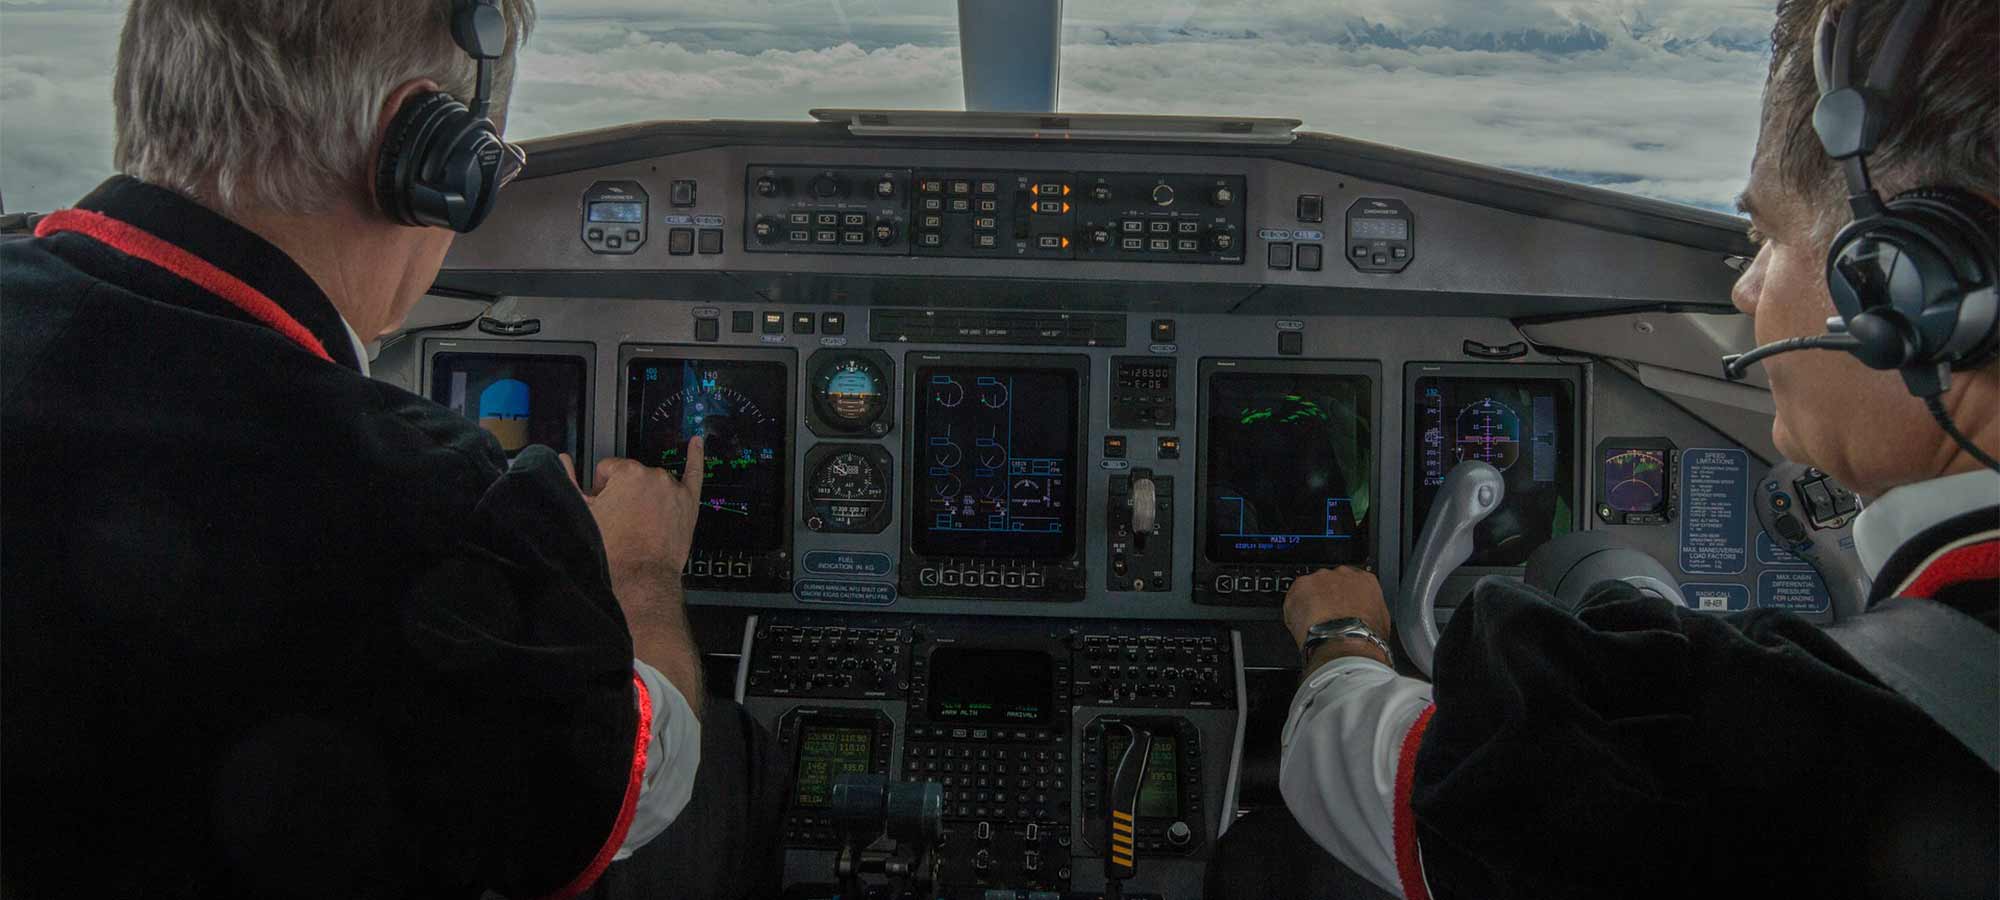 The Finer Points: Catching Mistakes on IFR Flights